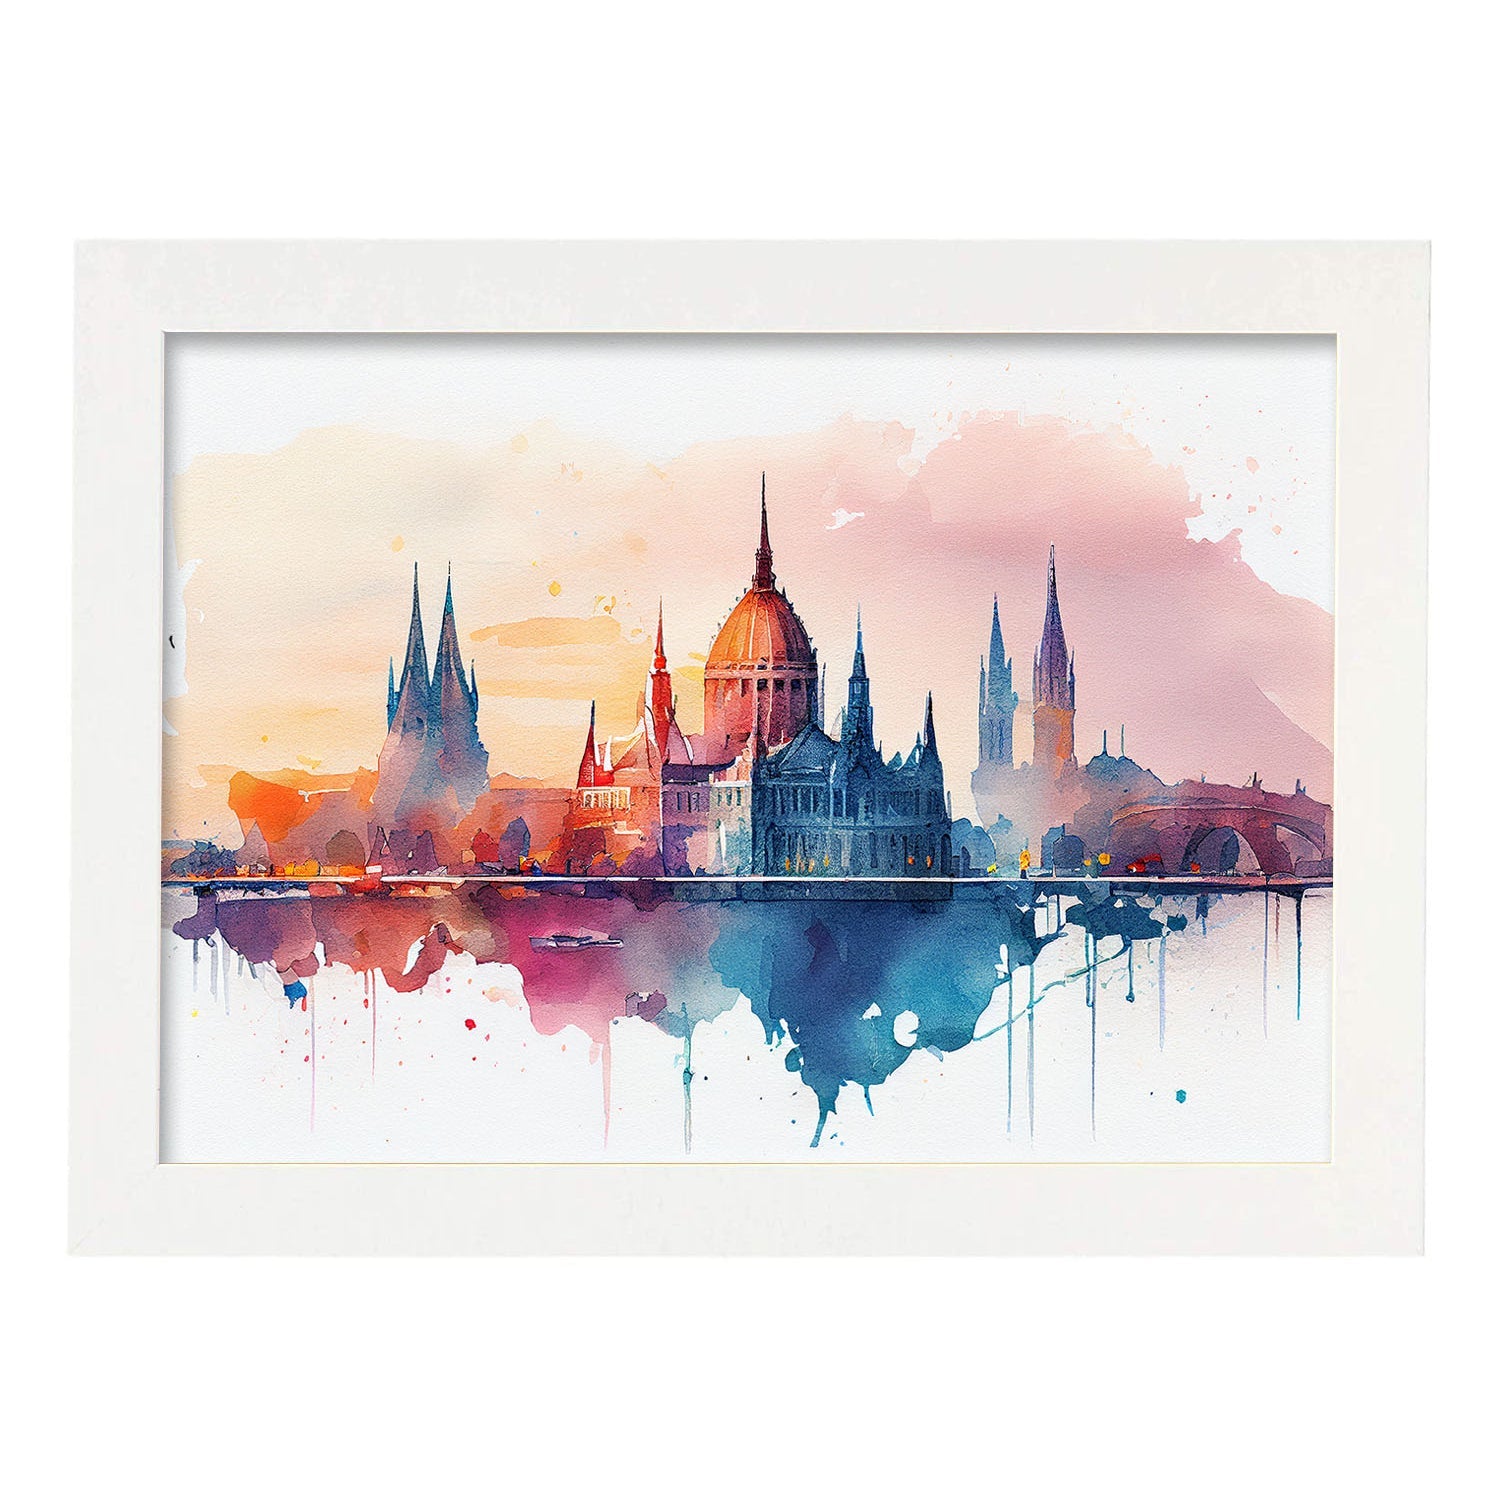 Nacnic watercolor of a skyline of the city of Budapest. Aesthetic Wall Art Prints for Bedroom or Living Room Design.-Artwork-Nacnic-A4-Marco Blanco-Nacnic Estudio SL